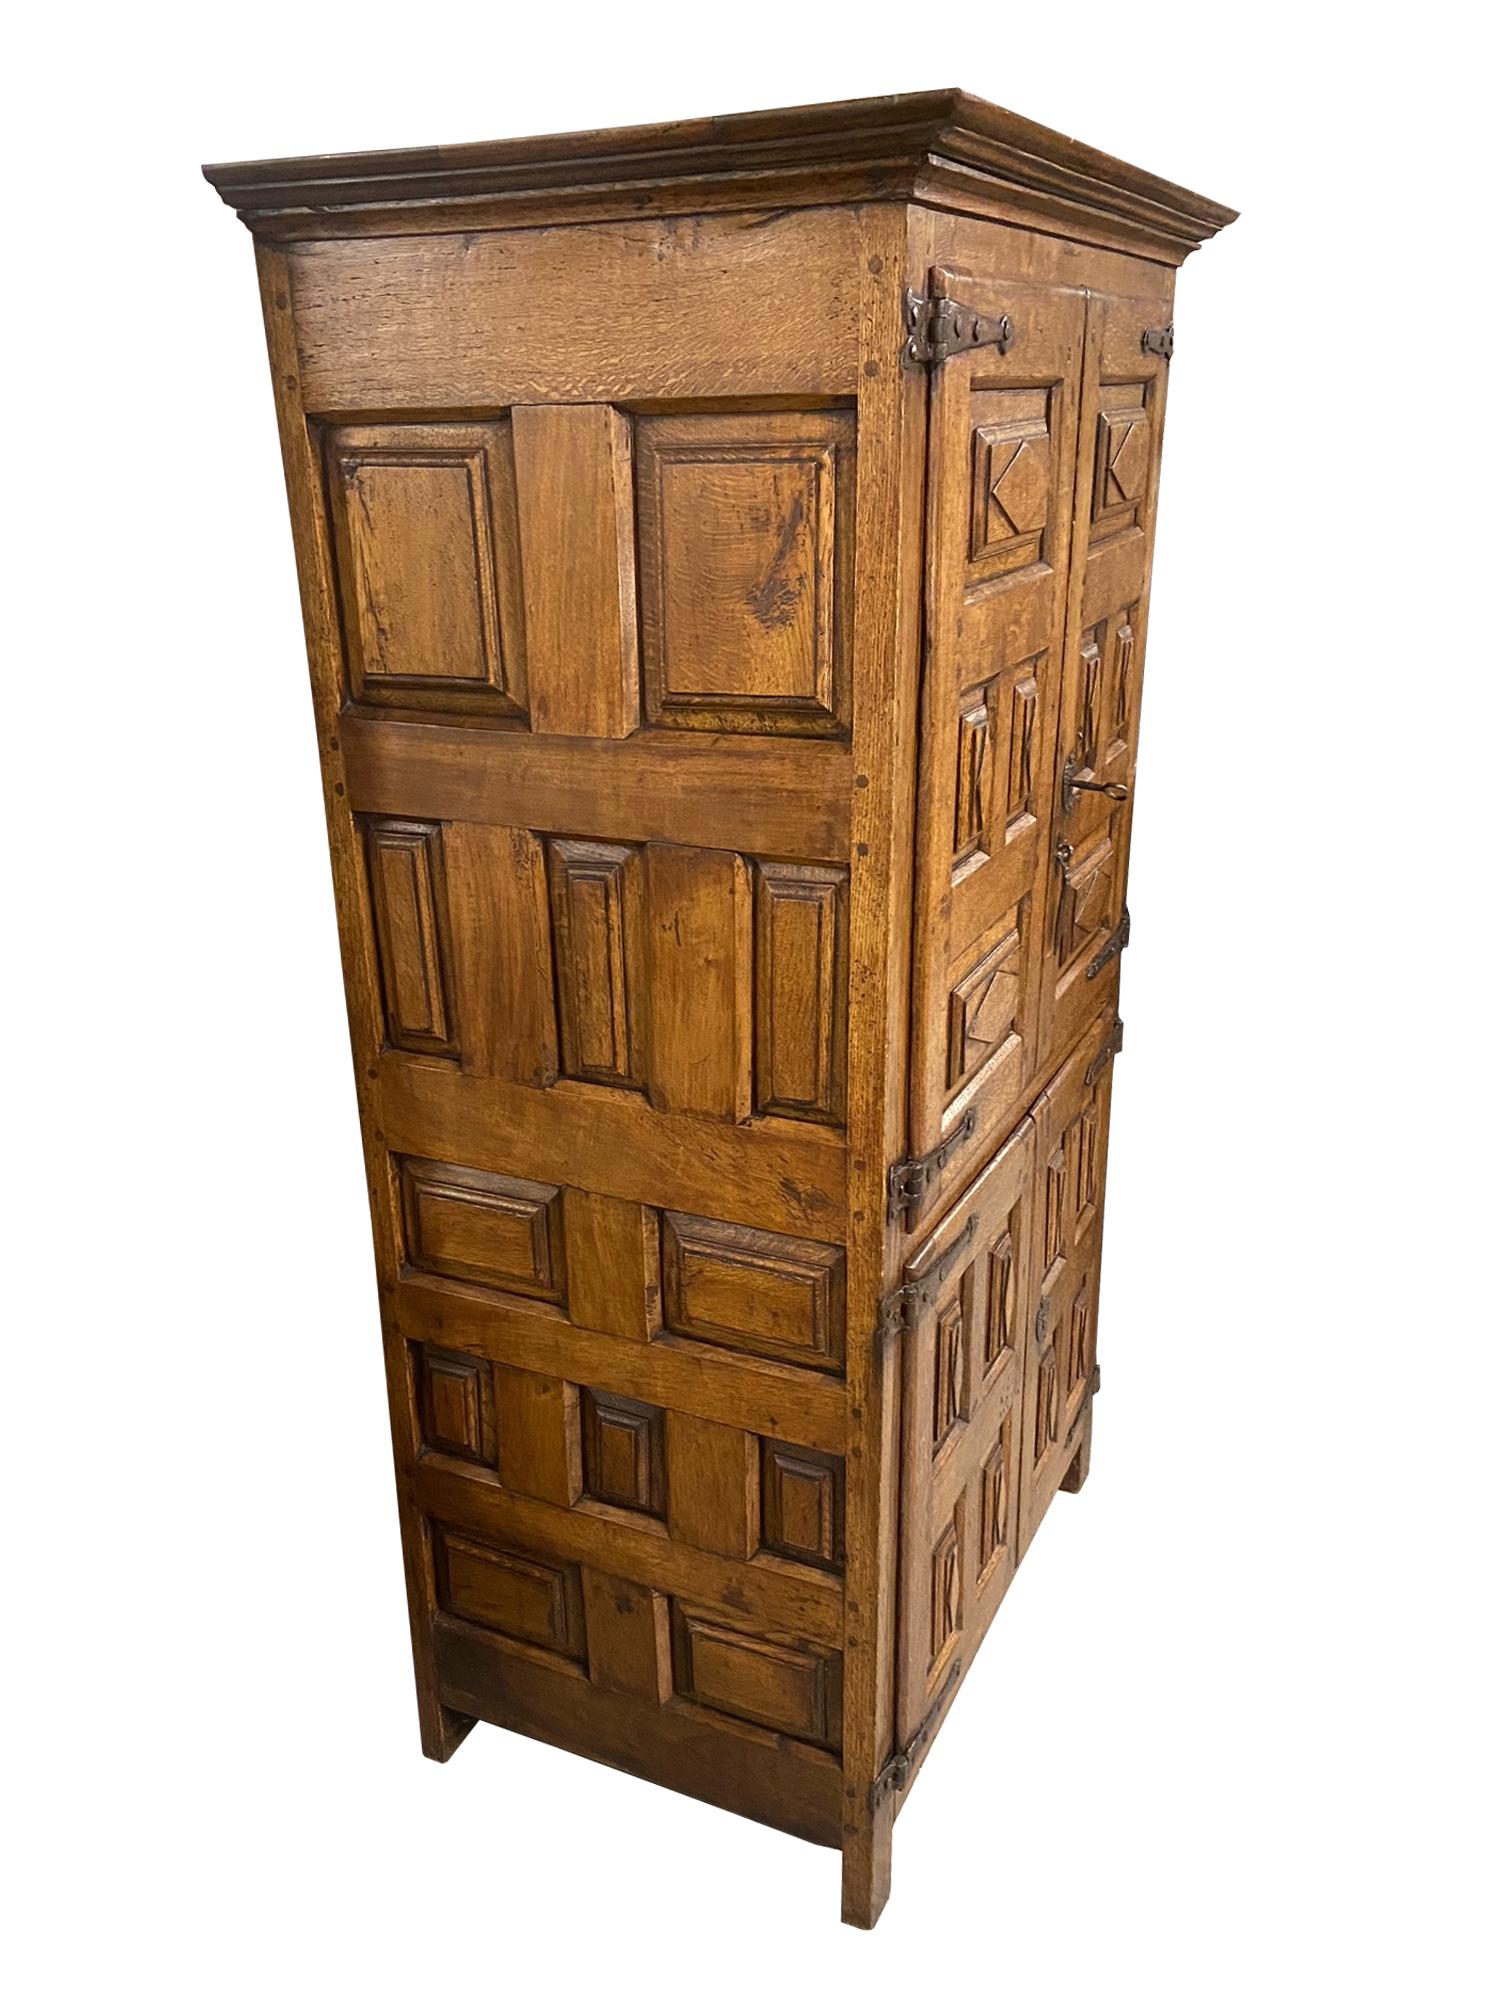 Solid oak cupboard from Northern Spain.
Two doors with geometric paneling.
Iron hardware with original keys.

Dimensions:
81?H x 26.5?D x 53?W.